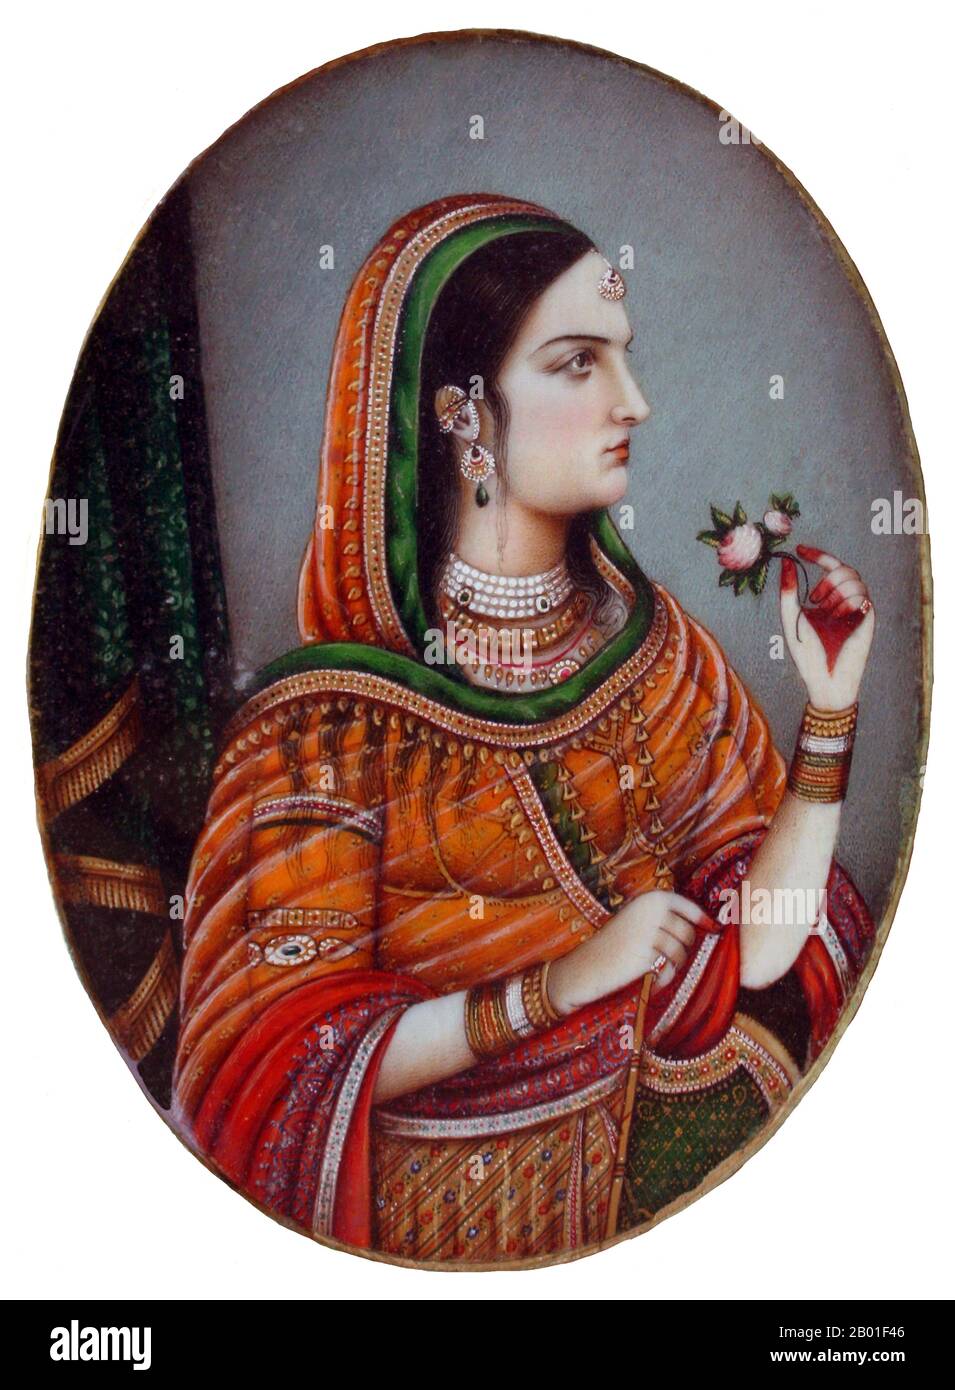 India: Empress Nur Jahan, wife of Emperor Jahangir. Miniature watercolour painting, Delhi, c. 1840.  Begum Nur Jahan (alternative spelling Noor Jahan, Nur Jehan, Nor Jahan), also known as Mehr-un-Nisaa, was an Empress of the Mughal Dynasty that ruled much of the Indian subcontinent.  Begum Nur Jahan was the twentieth and favourite wife of Mughal Emperor Jahangir, who was her second husband - and the most famous Empress of the Mughal Empire. The story of the couple's infatuation for each other and the relationship that abided between them is the stuff of many (often apocryphal) legends. Stock Photo